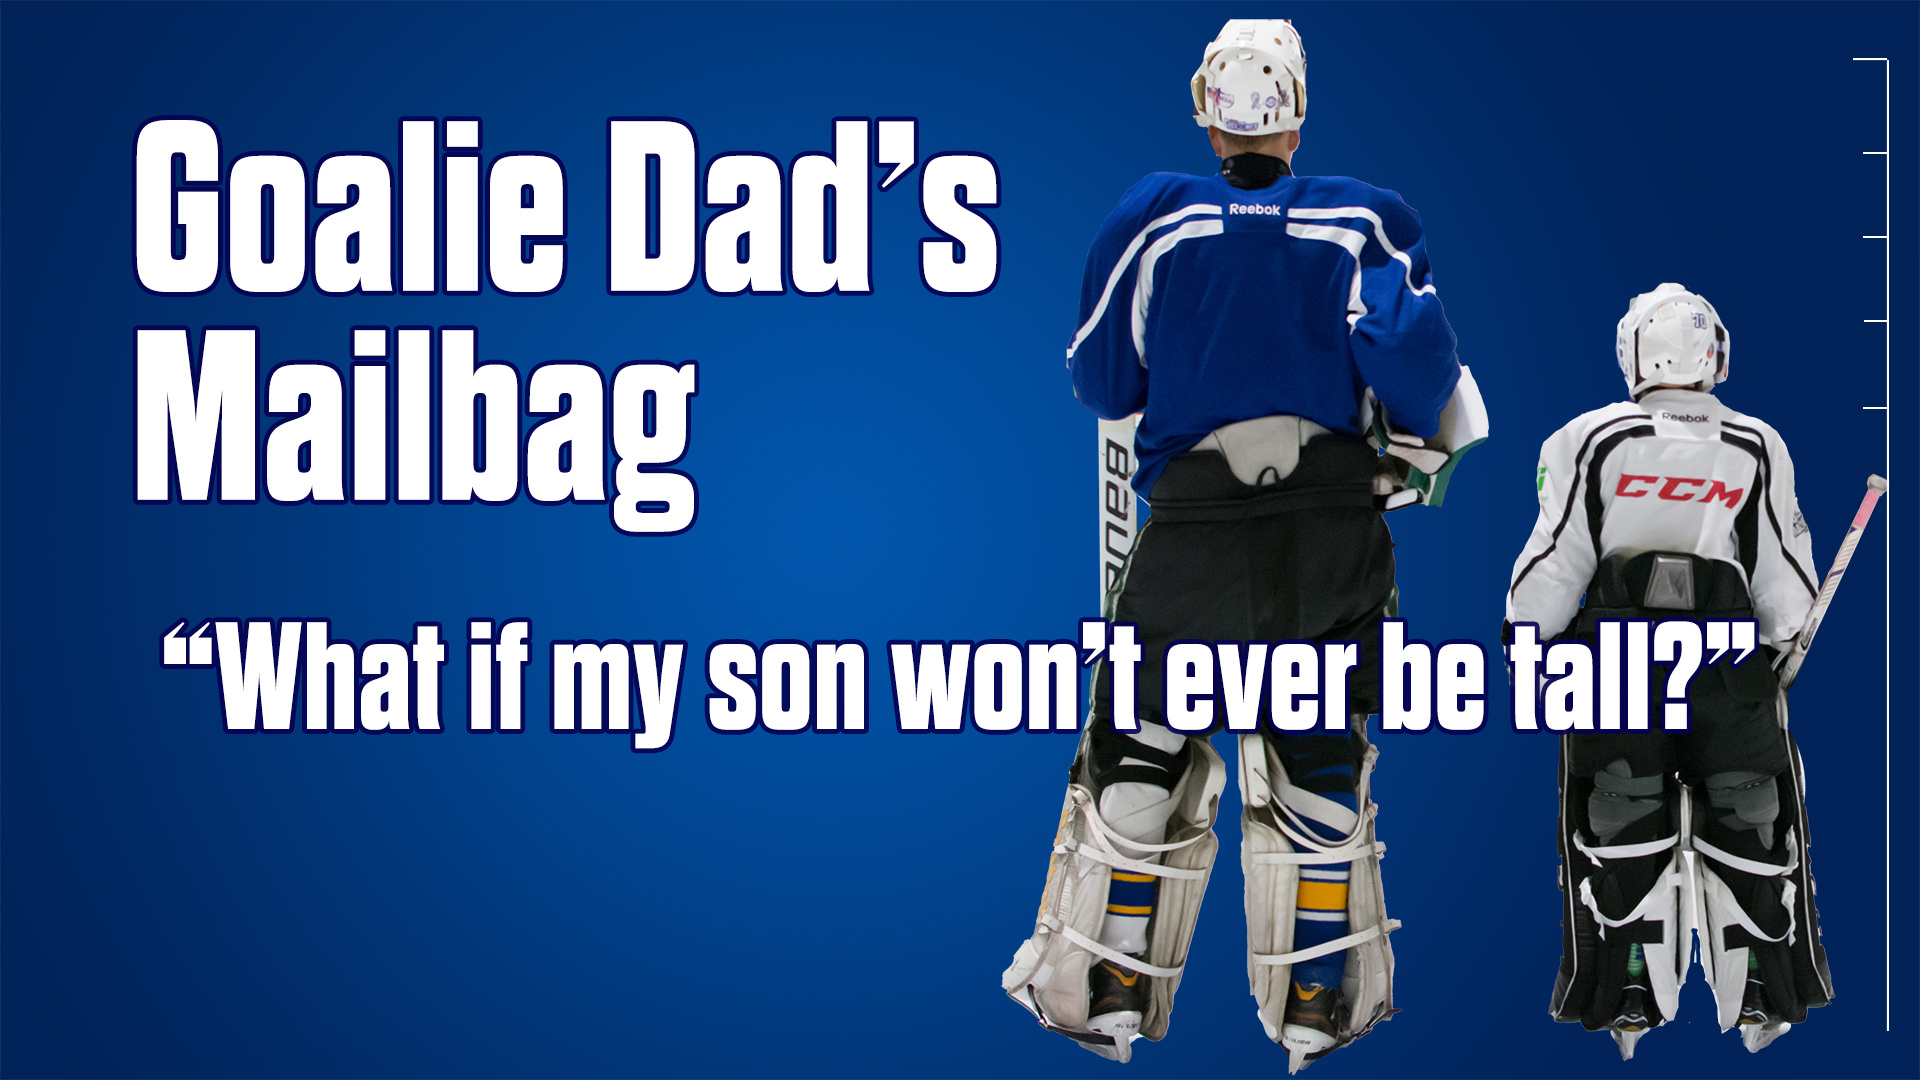 Goalie Dad answers a parent worried that height will hold their son back